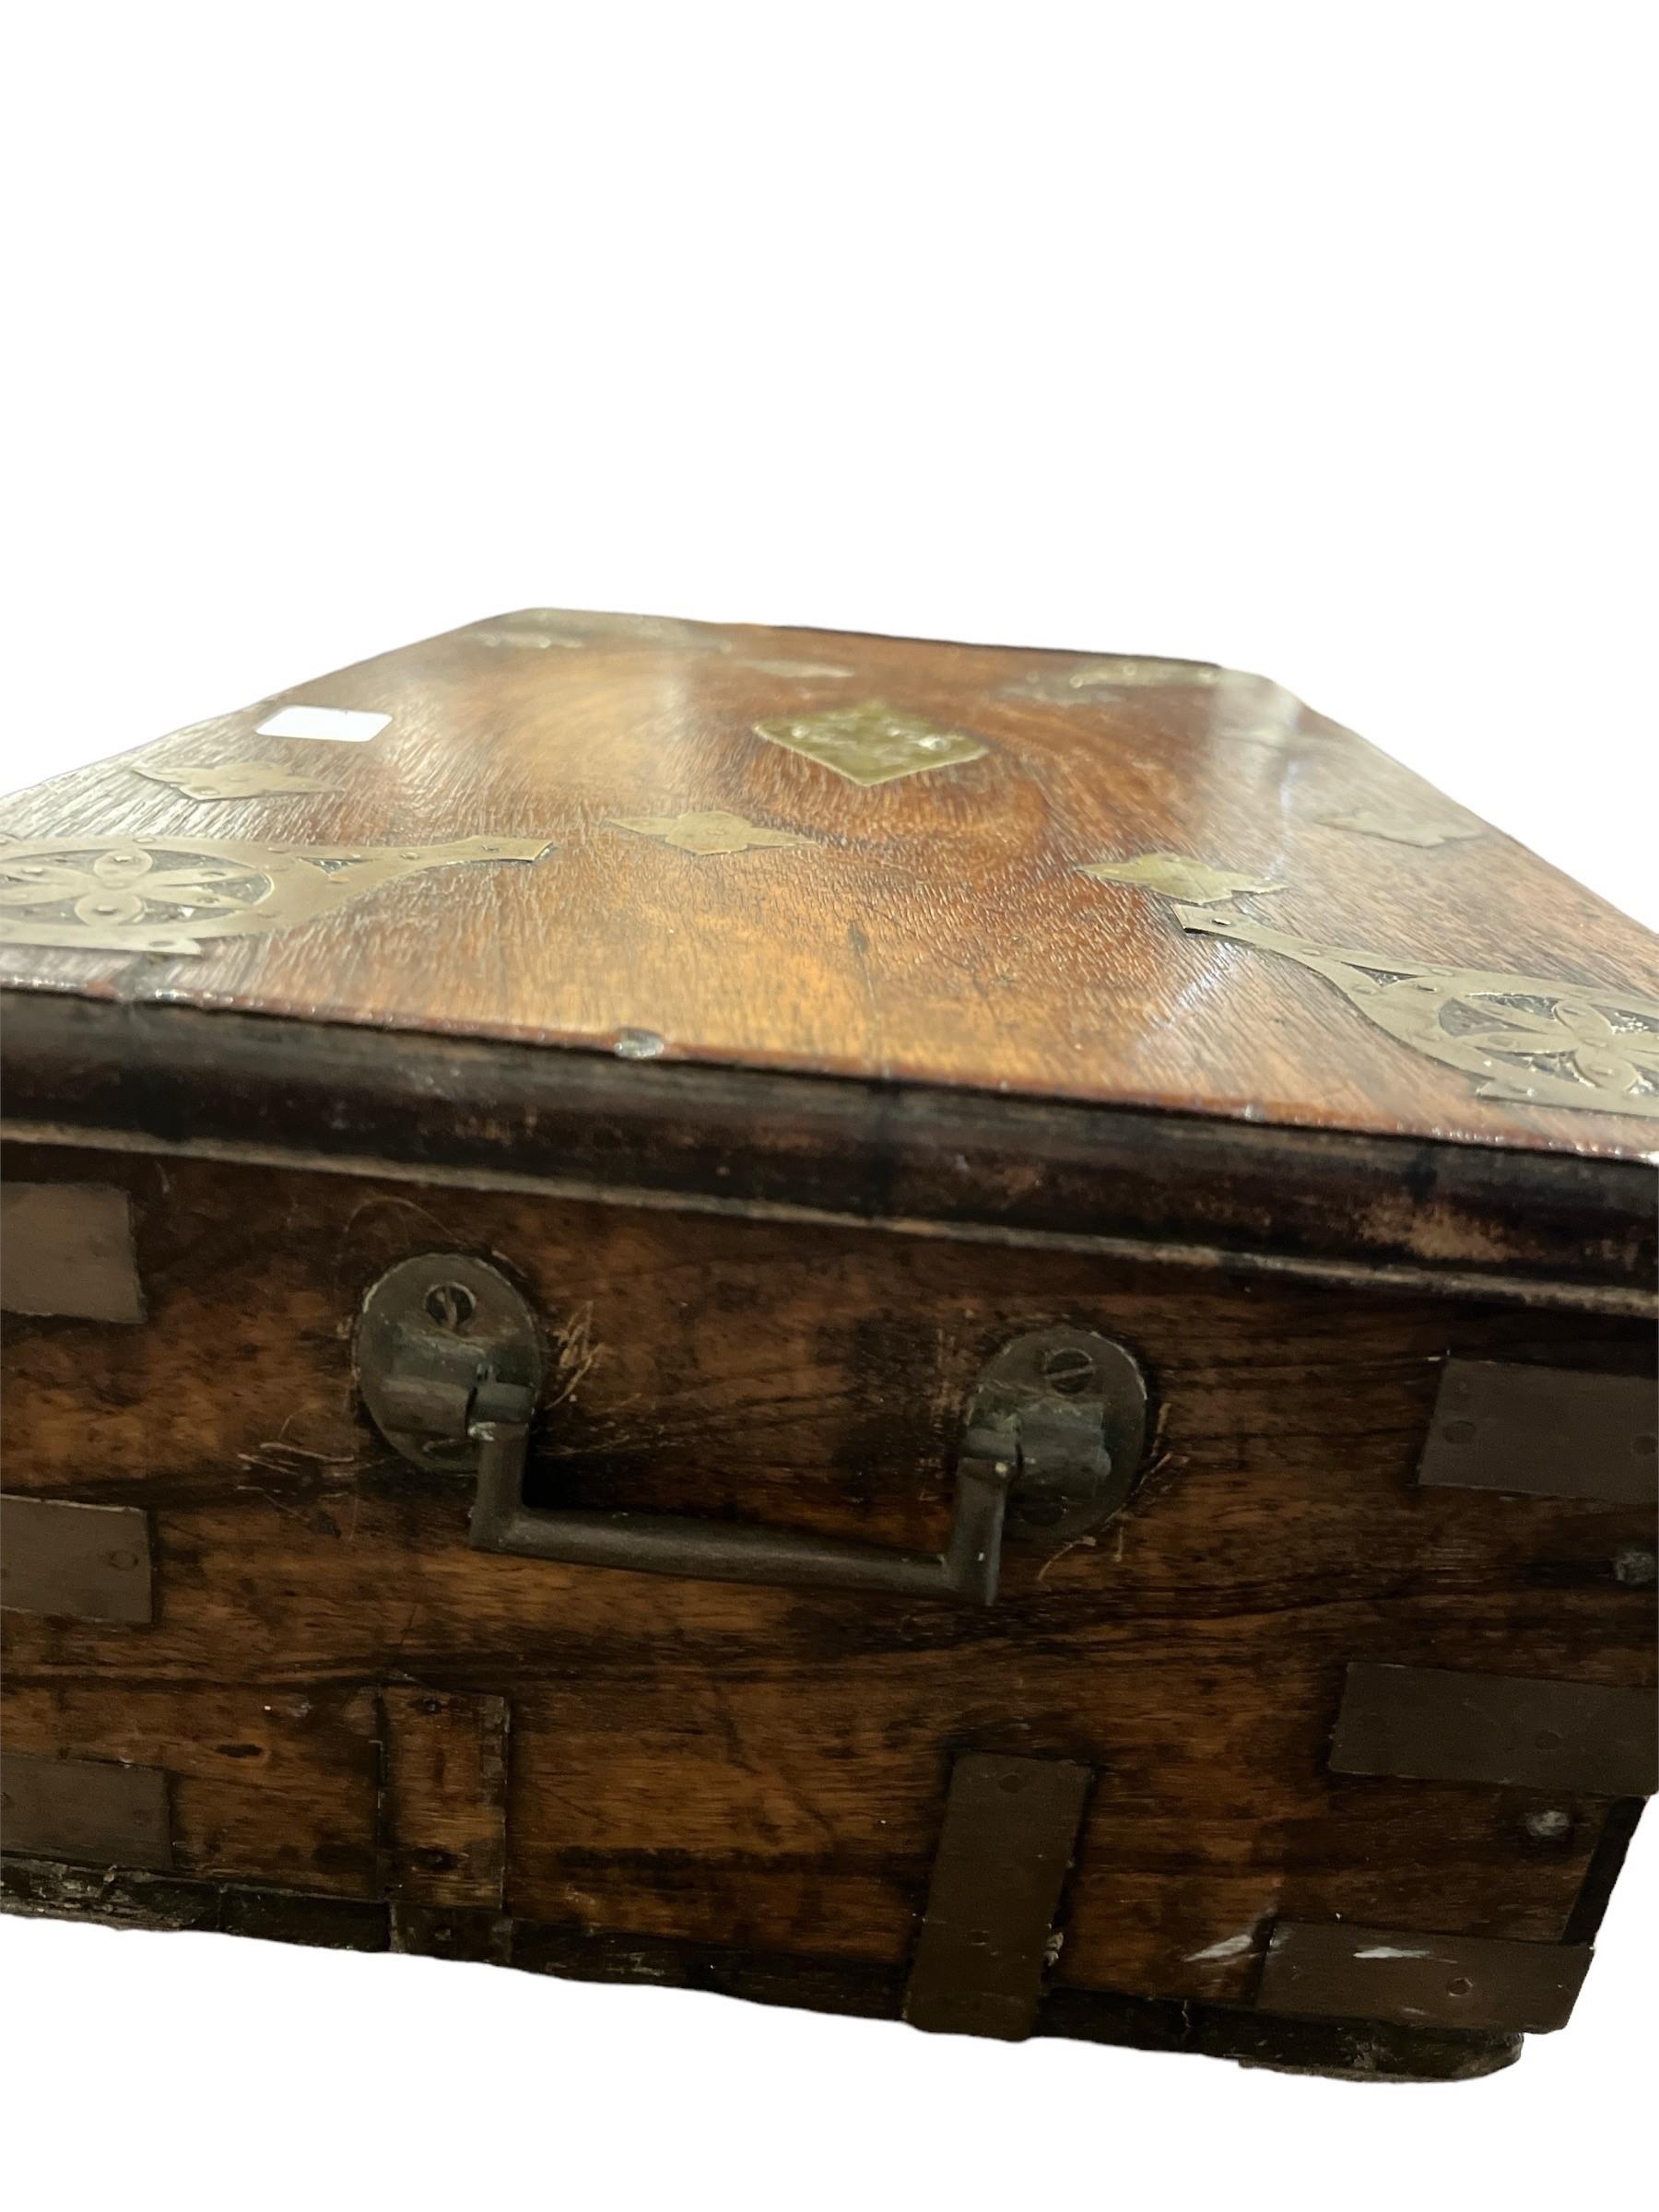 A 19TH CENTURY COLONIAL HARDWOOD AND BRASS BOUND DOCUMENT WRITING BOX With fitted interior. - Image 2 of 4